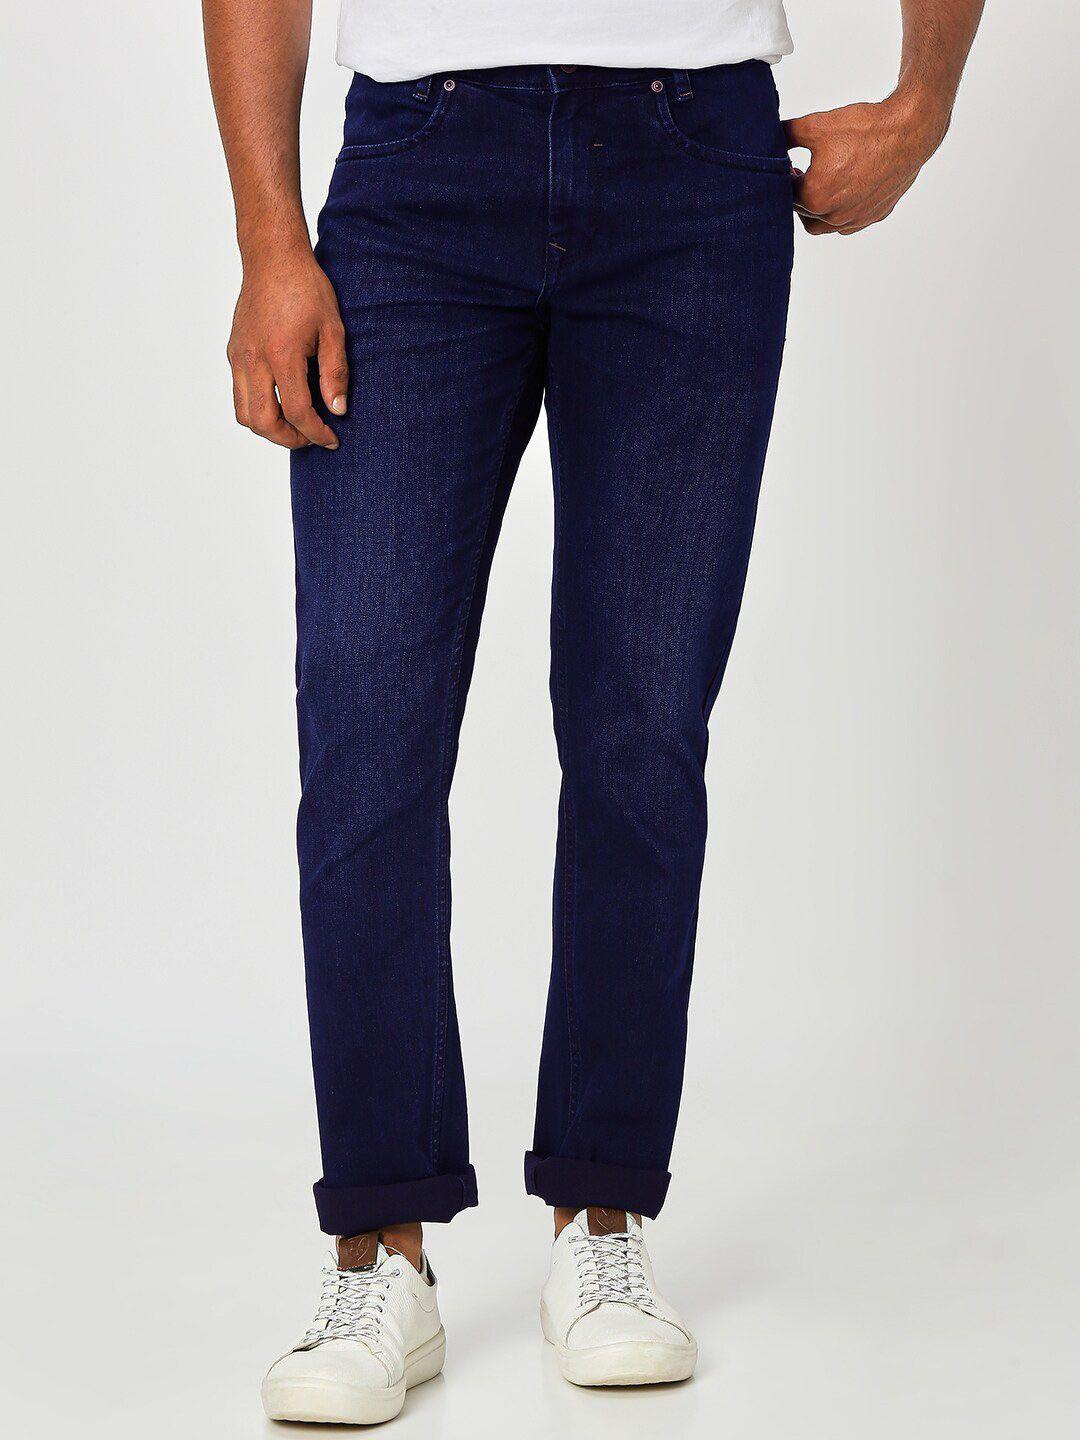 mufti-men-straight-fit-stretchable-jeans